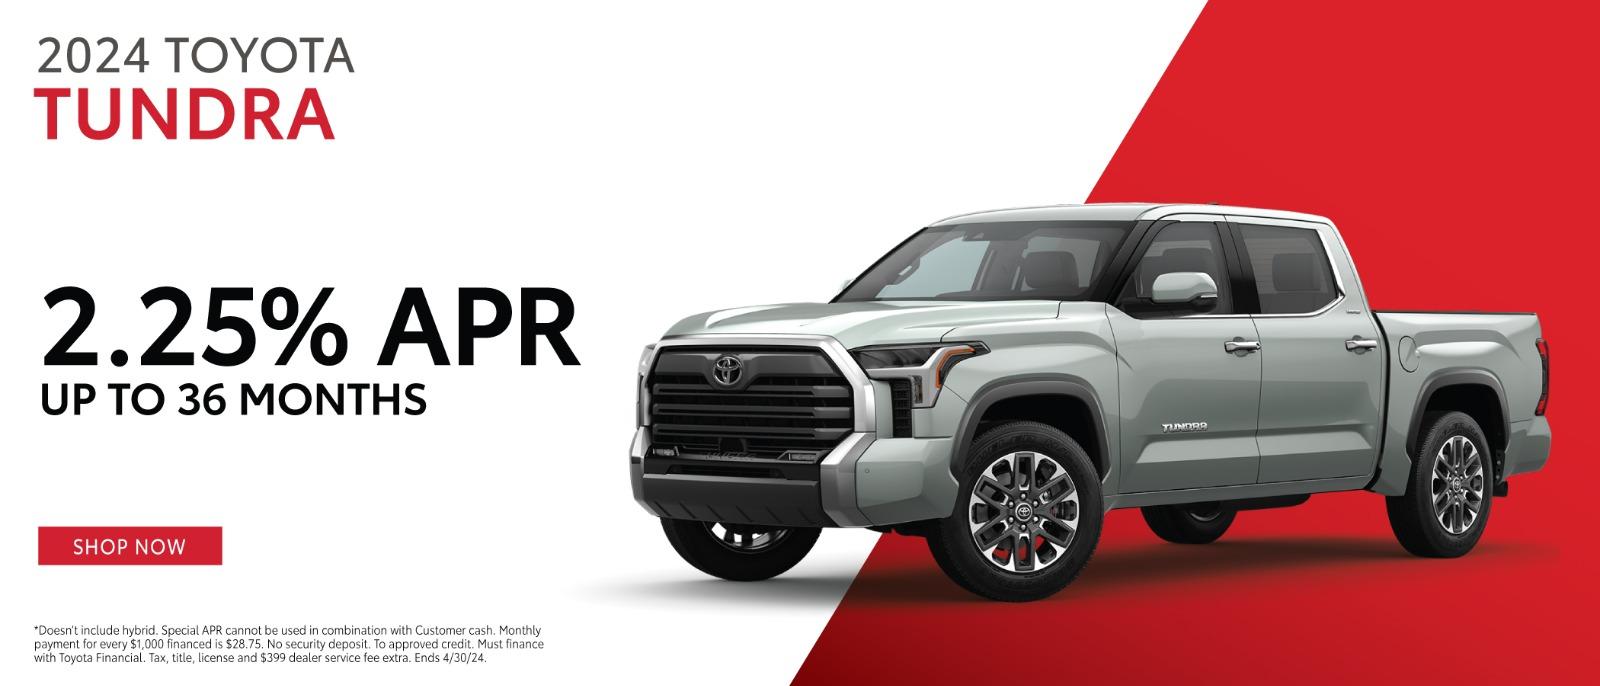 2024 Toyota Tundra | 2.25% APR up to 36 Months